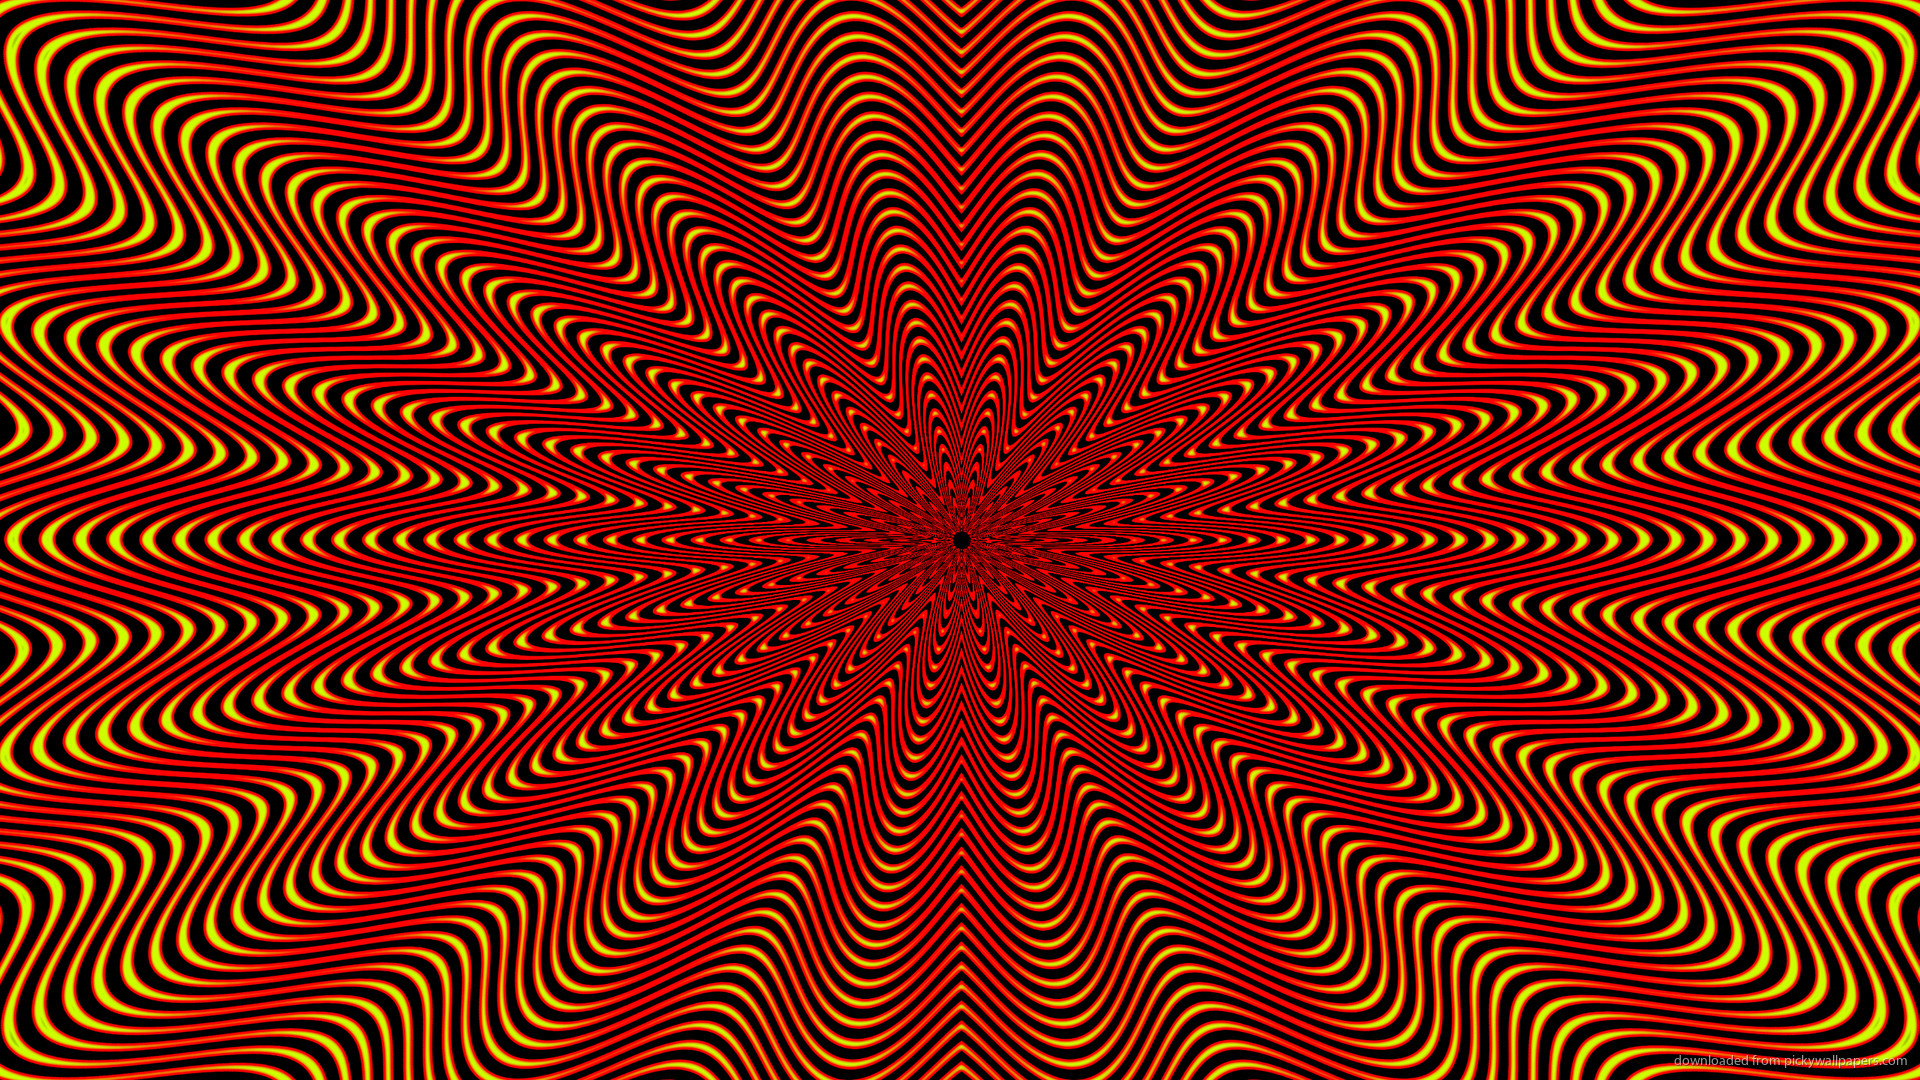 1920x1080 Normal (4:3) Red and Yellow Optical Illusion Wallpaper wallpaper